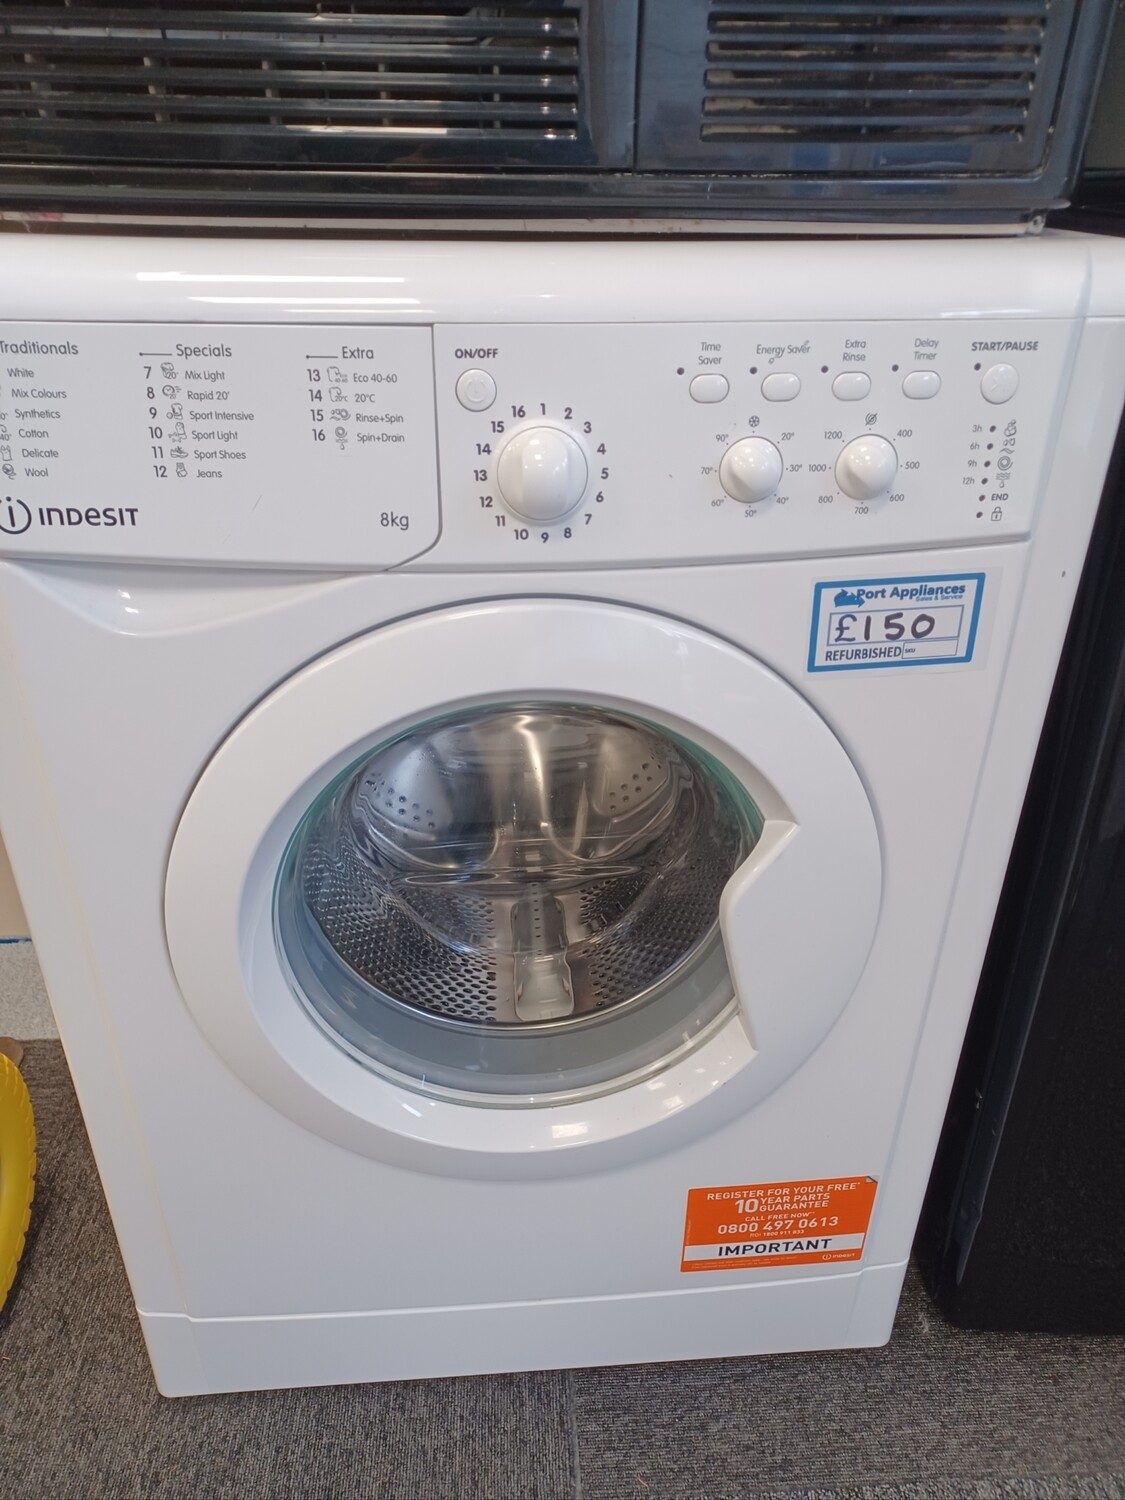 Indesit 8kg Load, 1200 Spin Washing Machine - White - Refurbished - 6 Month Guarantee. Located In our Whitby Road Shop